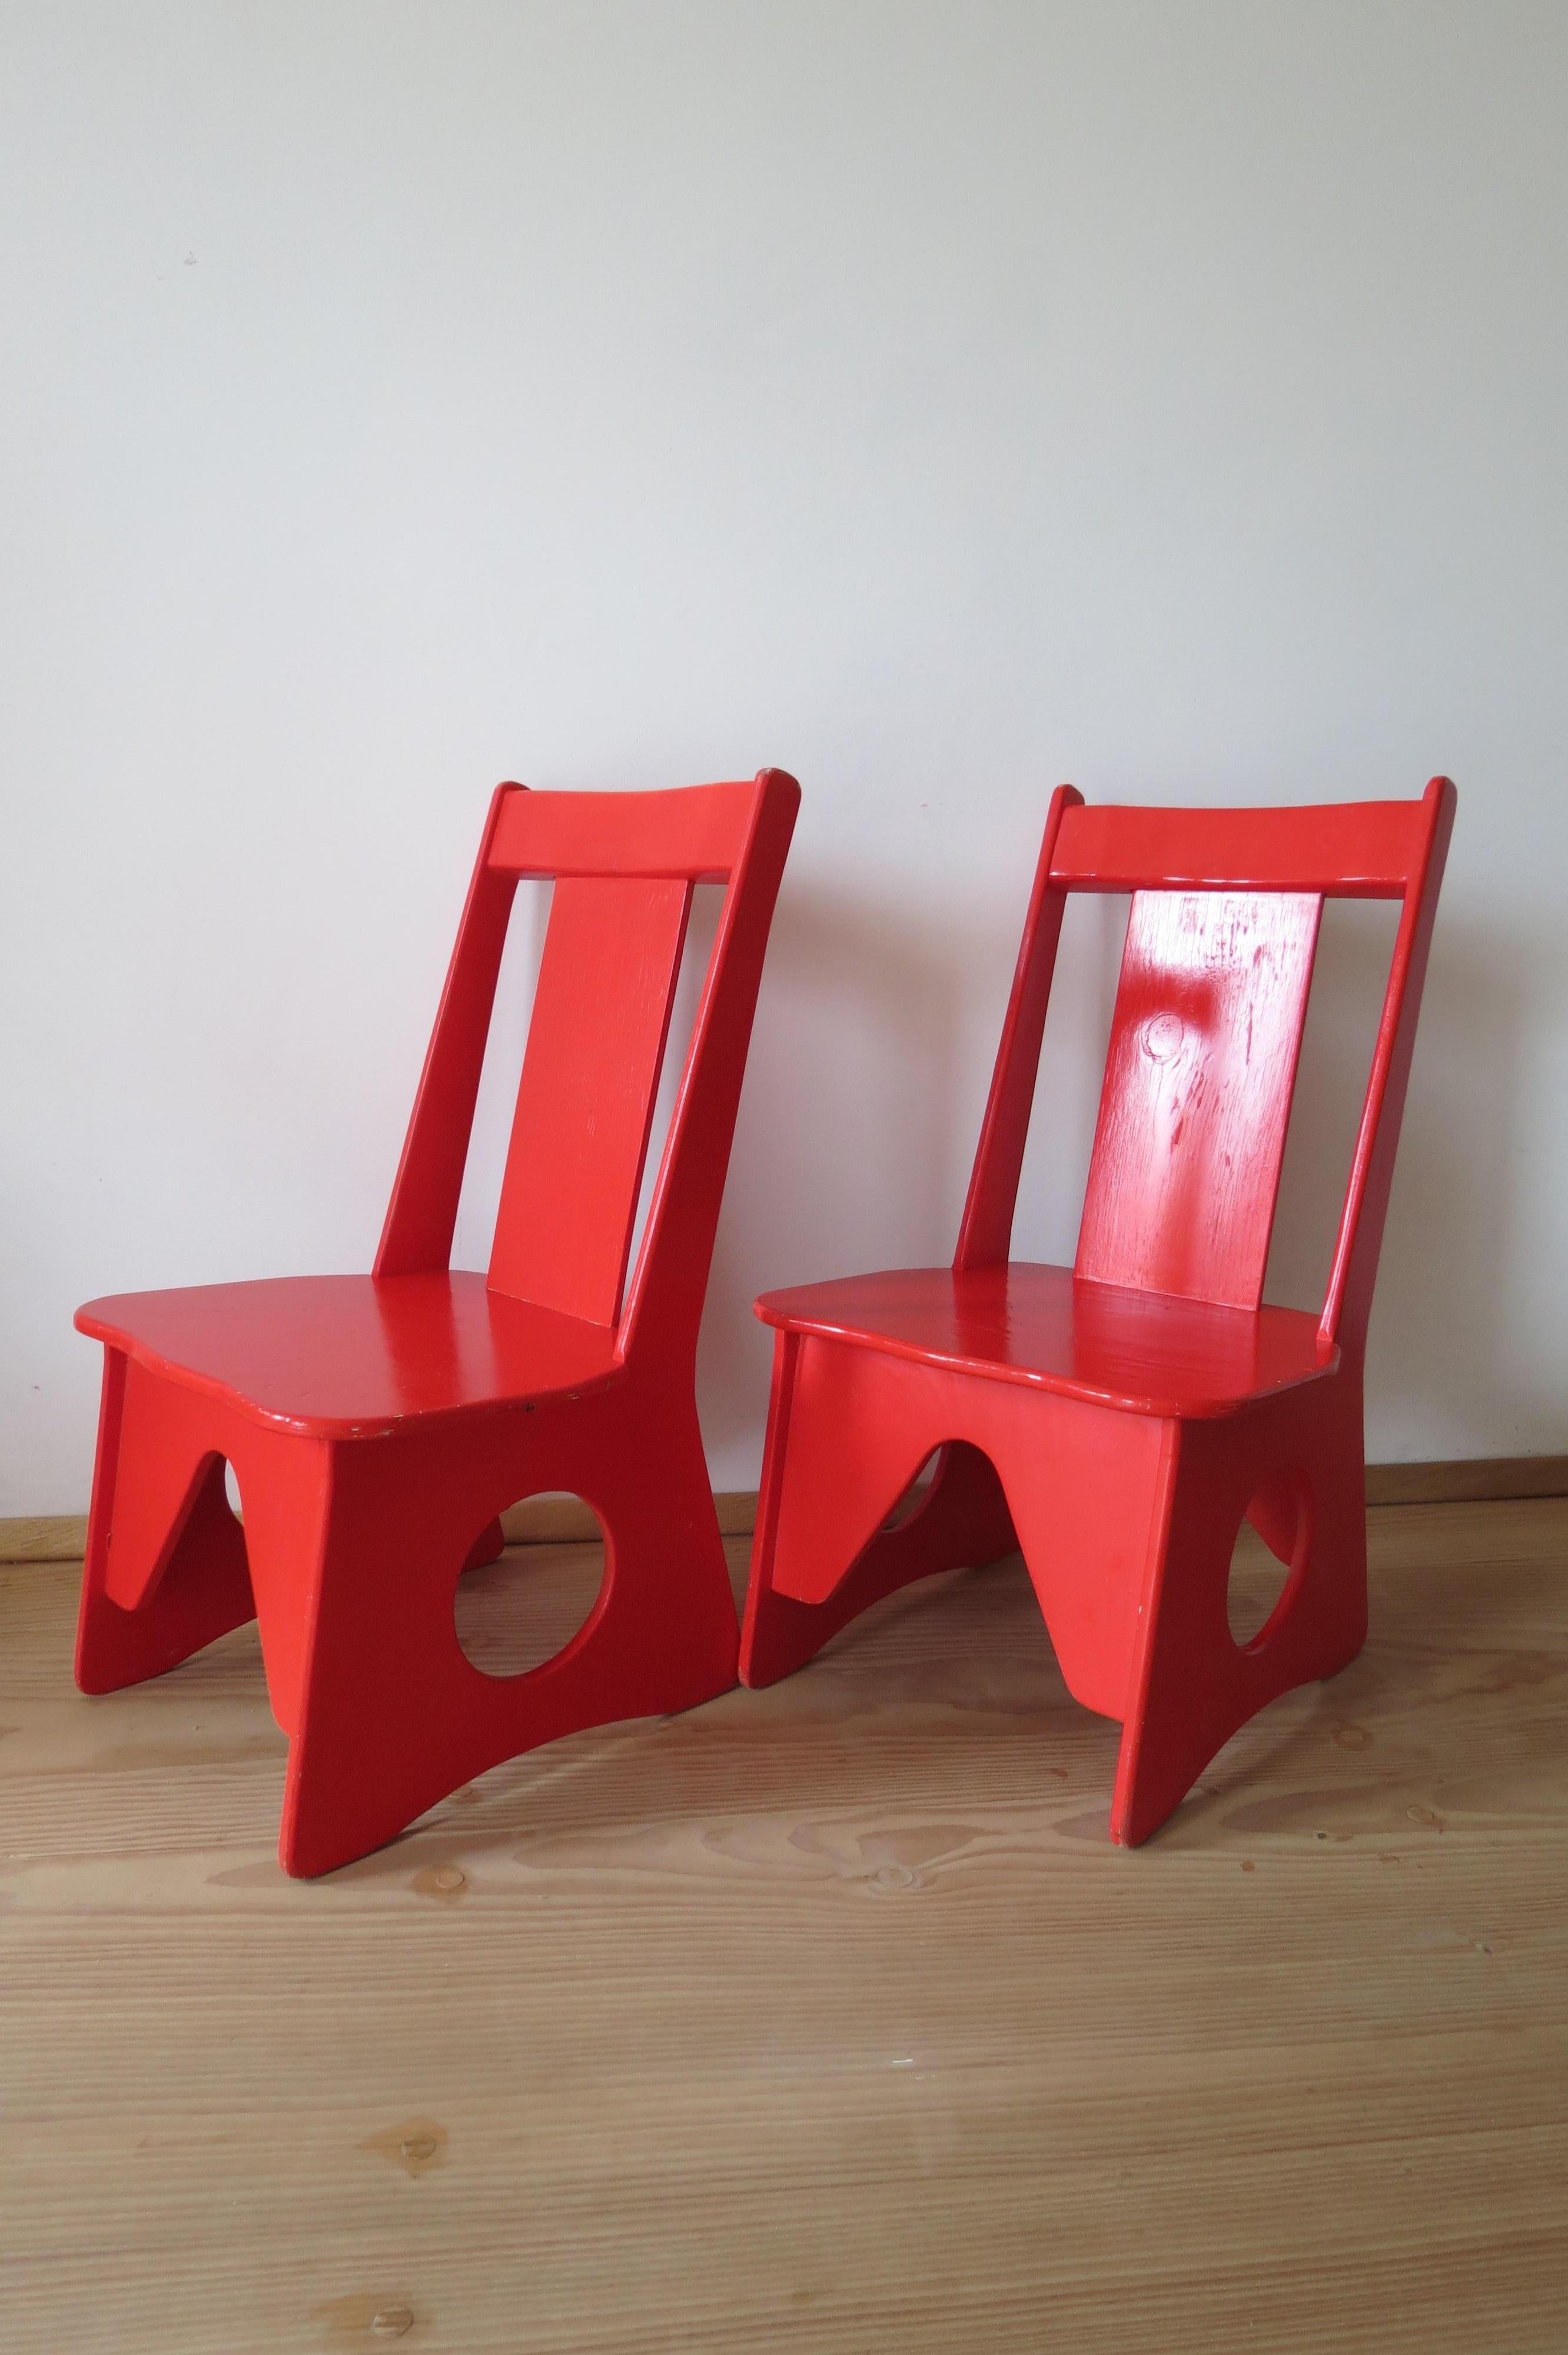 Painted Pair of Original 1960s Red Childrens Chairs